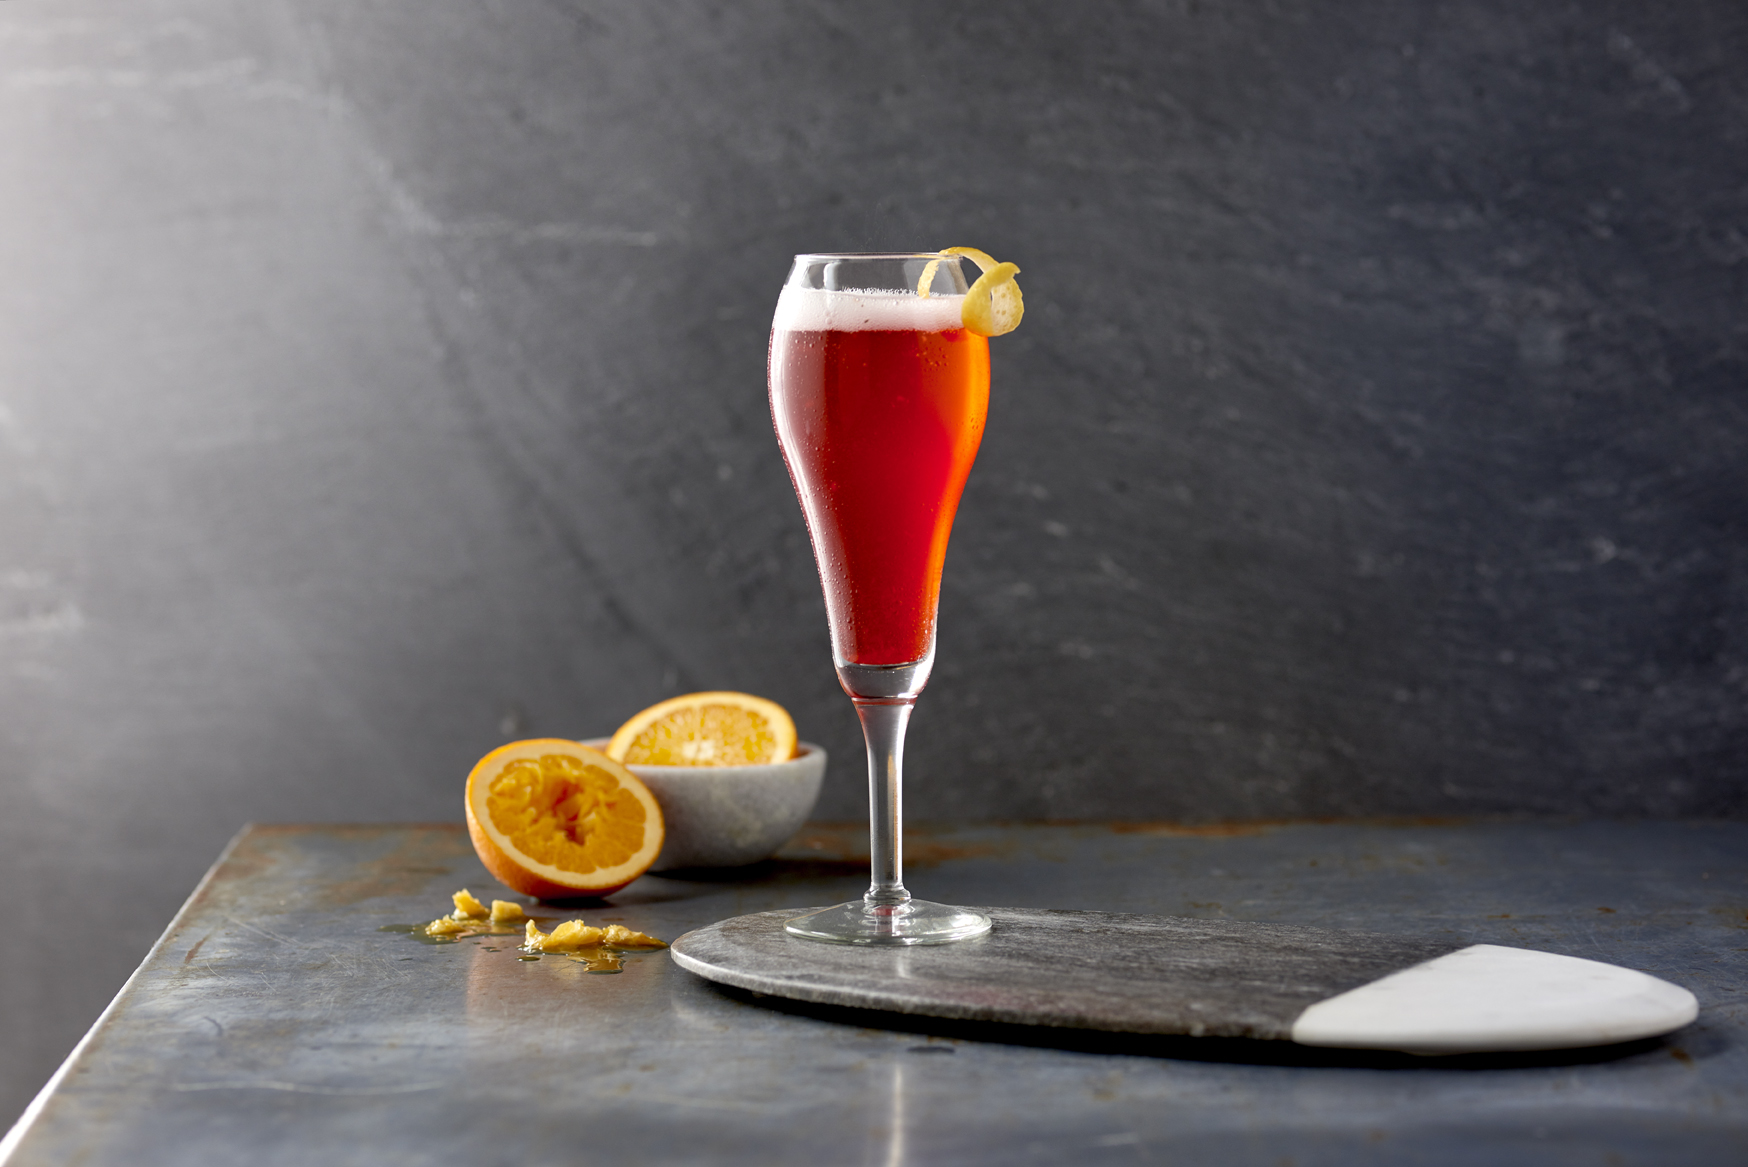 The perfect sexy Valentine’s Day nightcap cocktail that will sure please any date. Zodiac Vodka’s Black Cherry 75 will set the mood <3